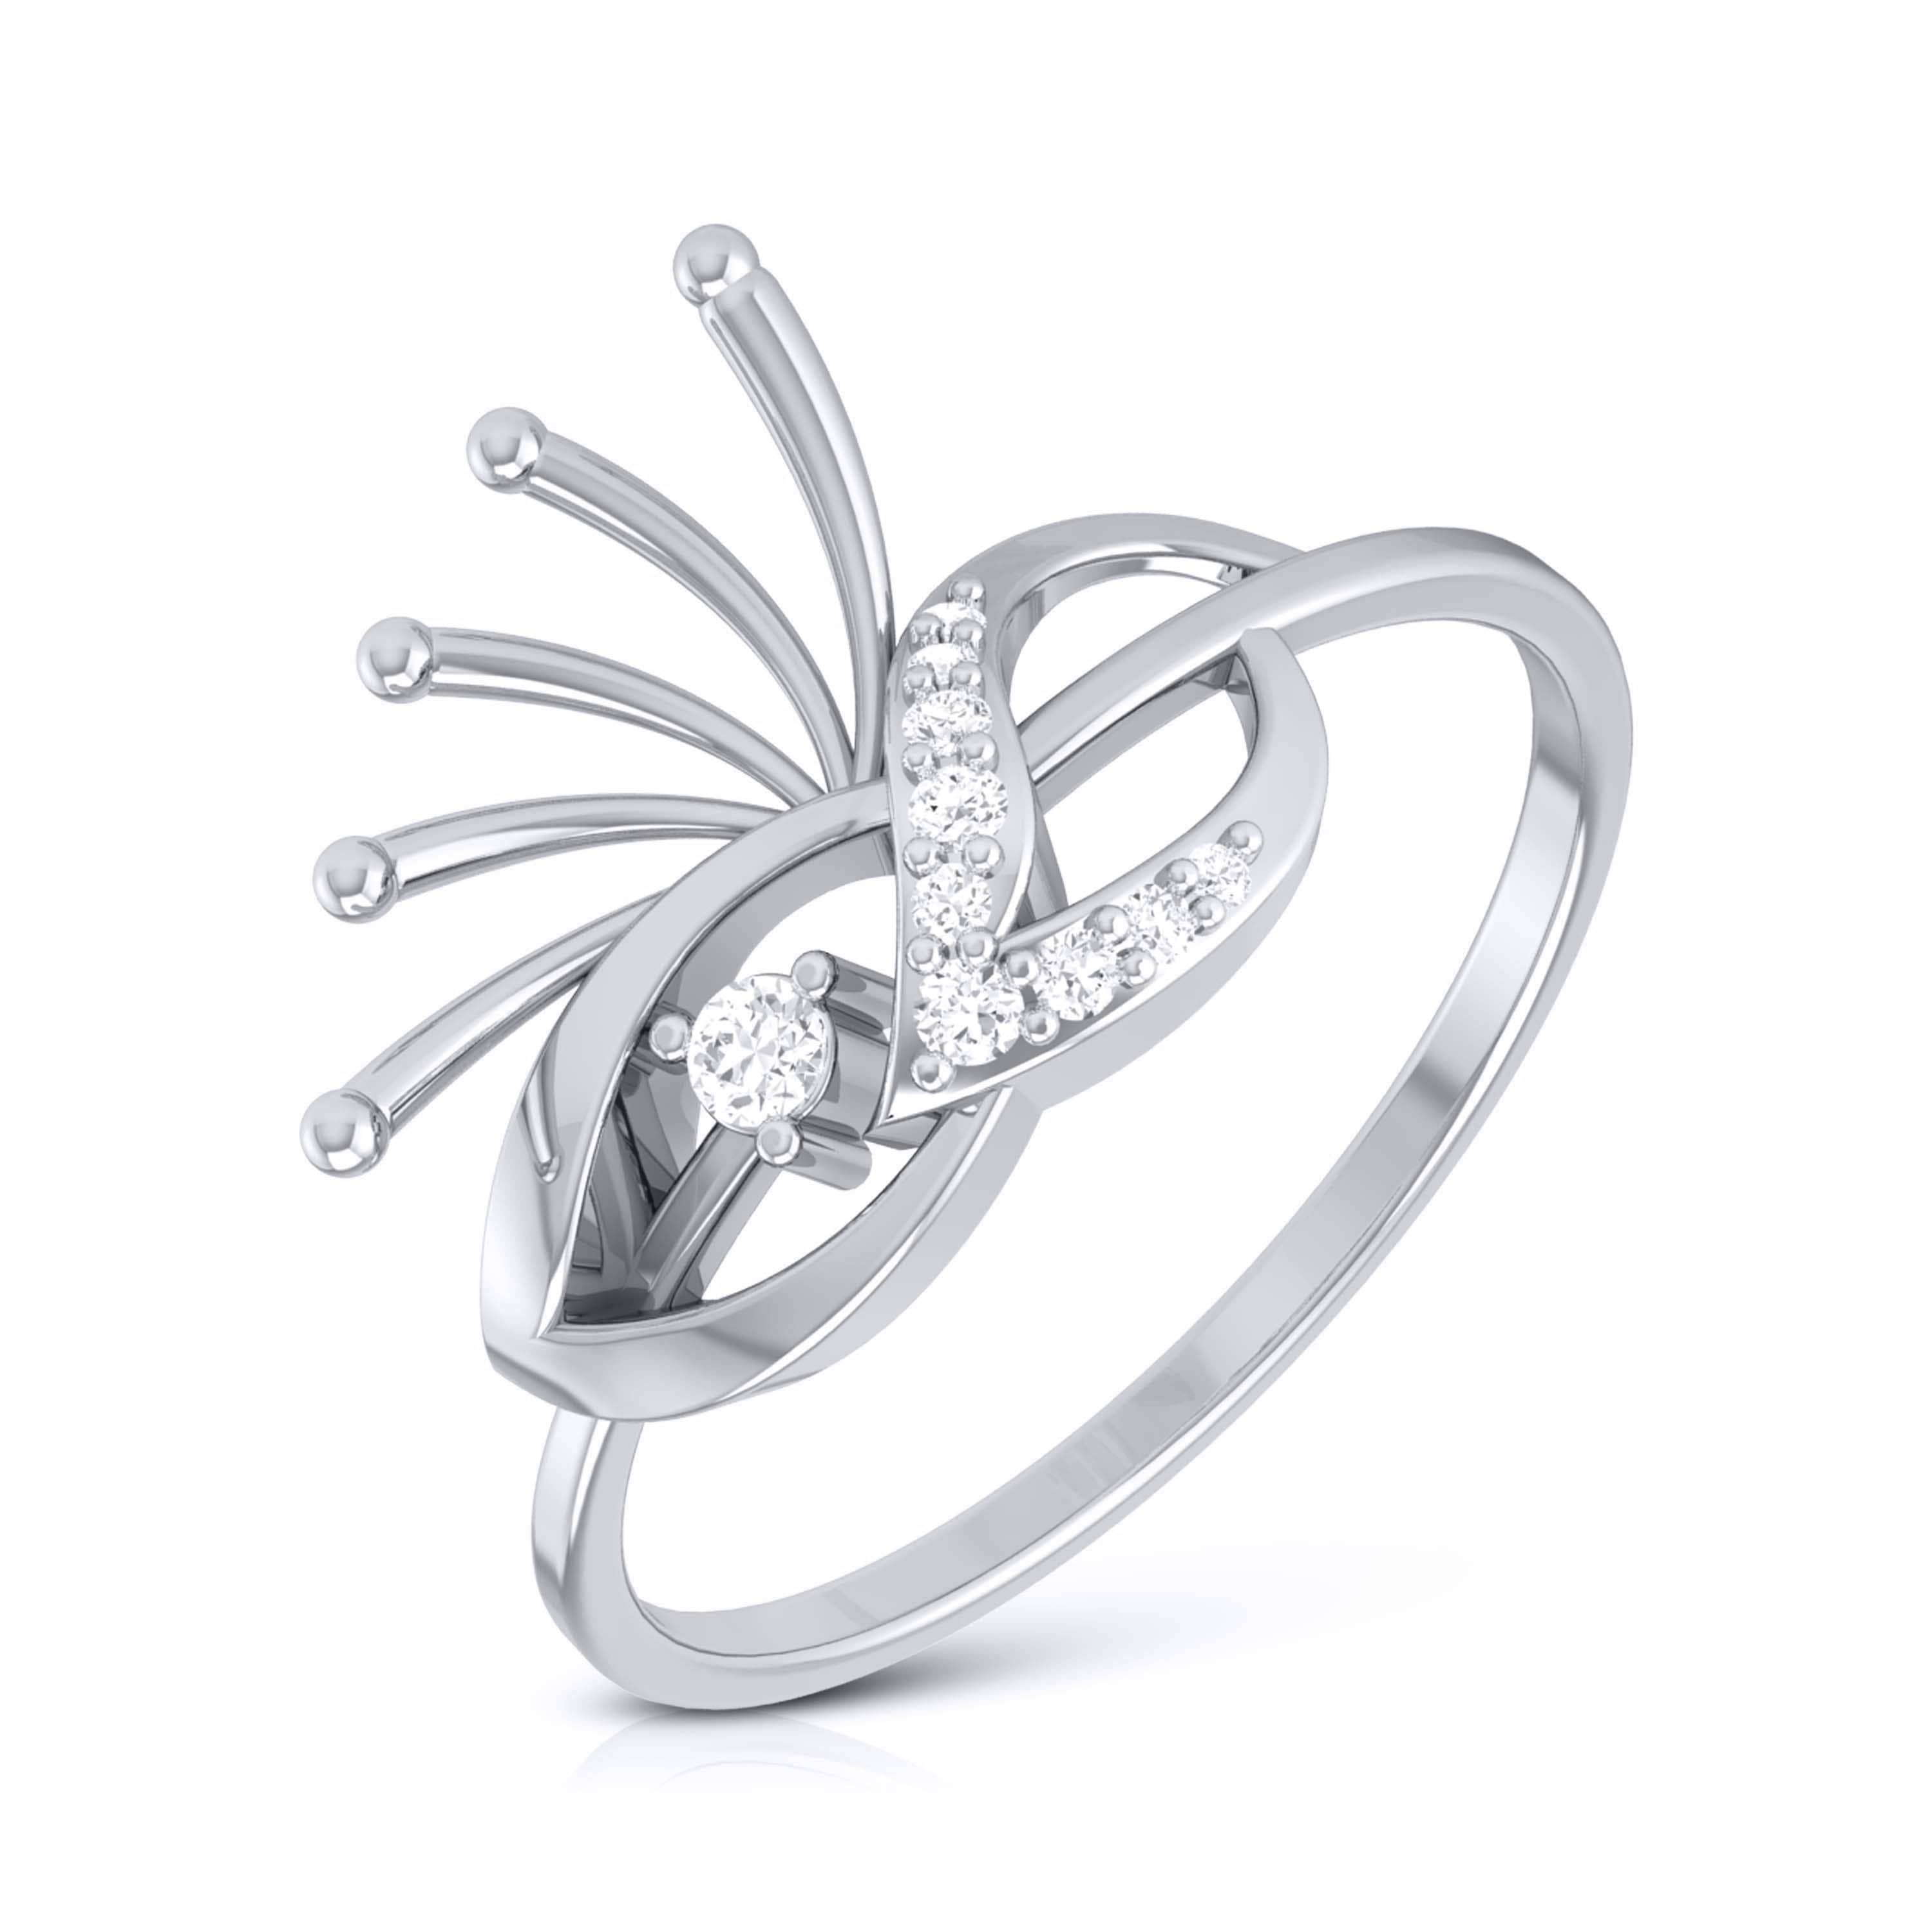 Heart design 925 solid sterling silver rings jewelry for girls, women in  Bangalore at best price by SILVER SHOPE JEWELLERS - Justdial